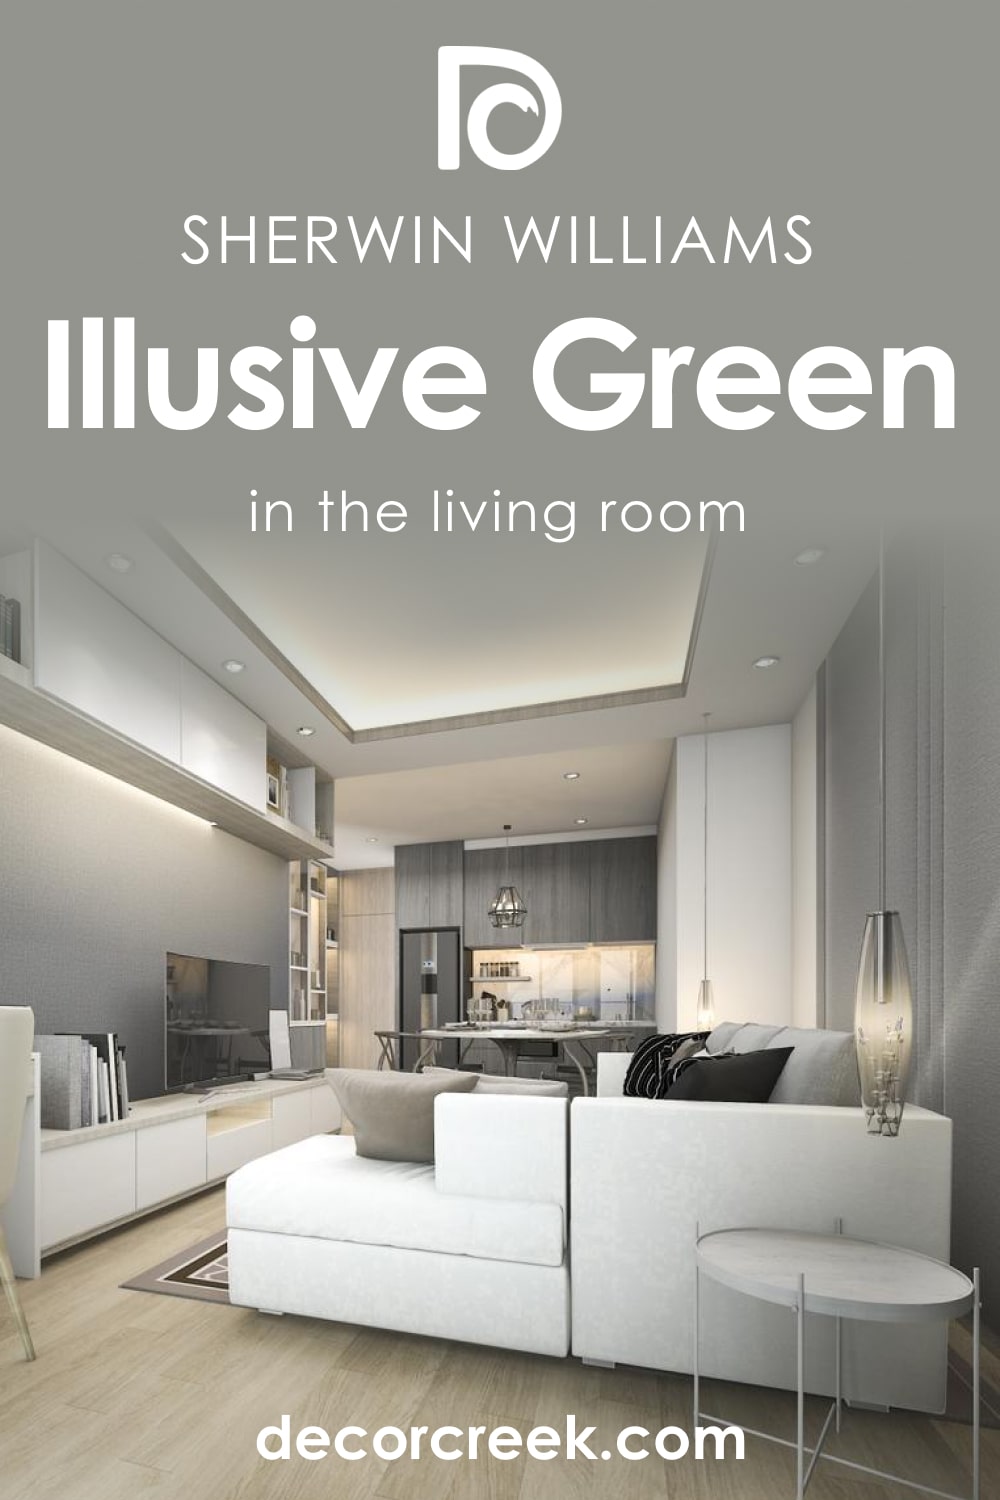 Illusive Green SW-9164 in the Living Room